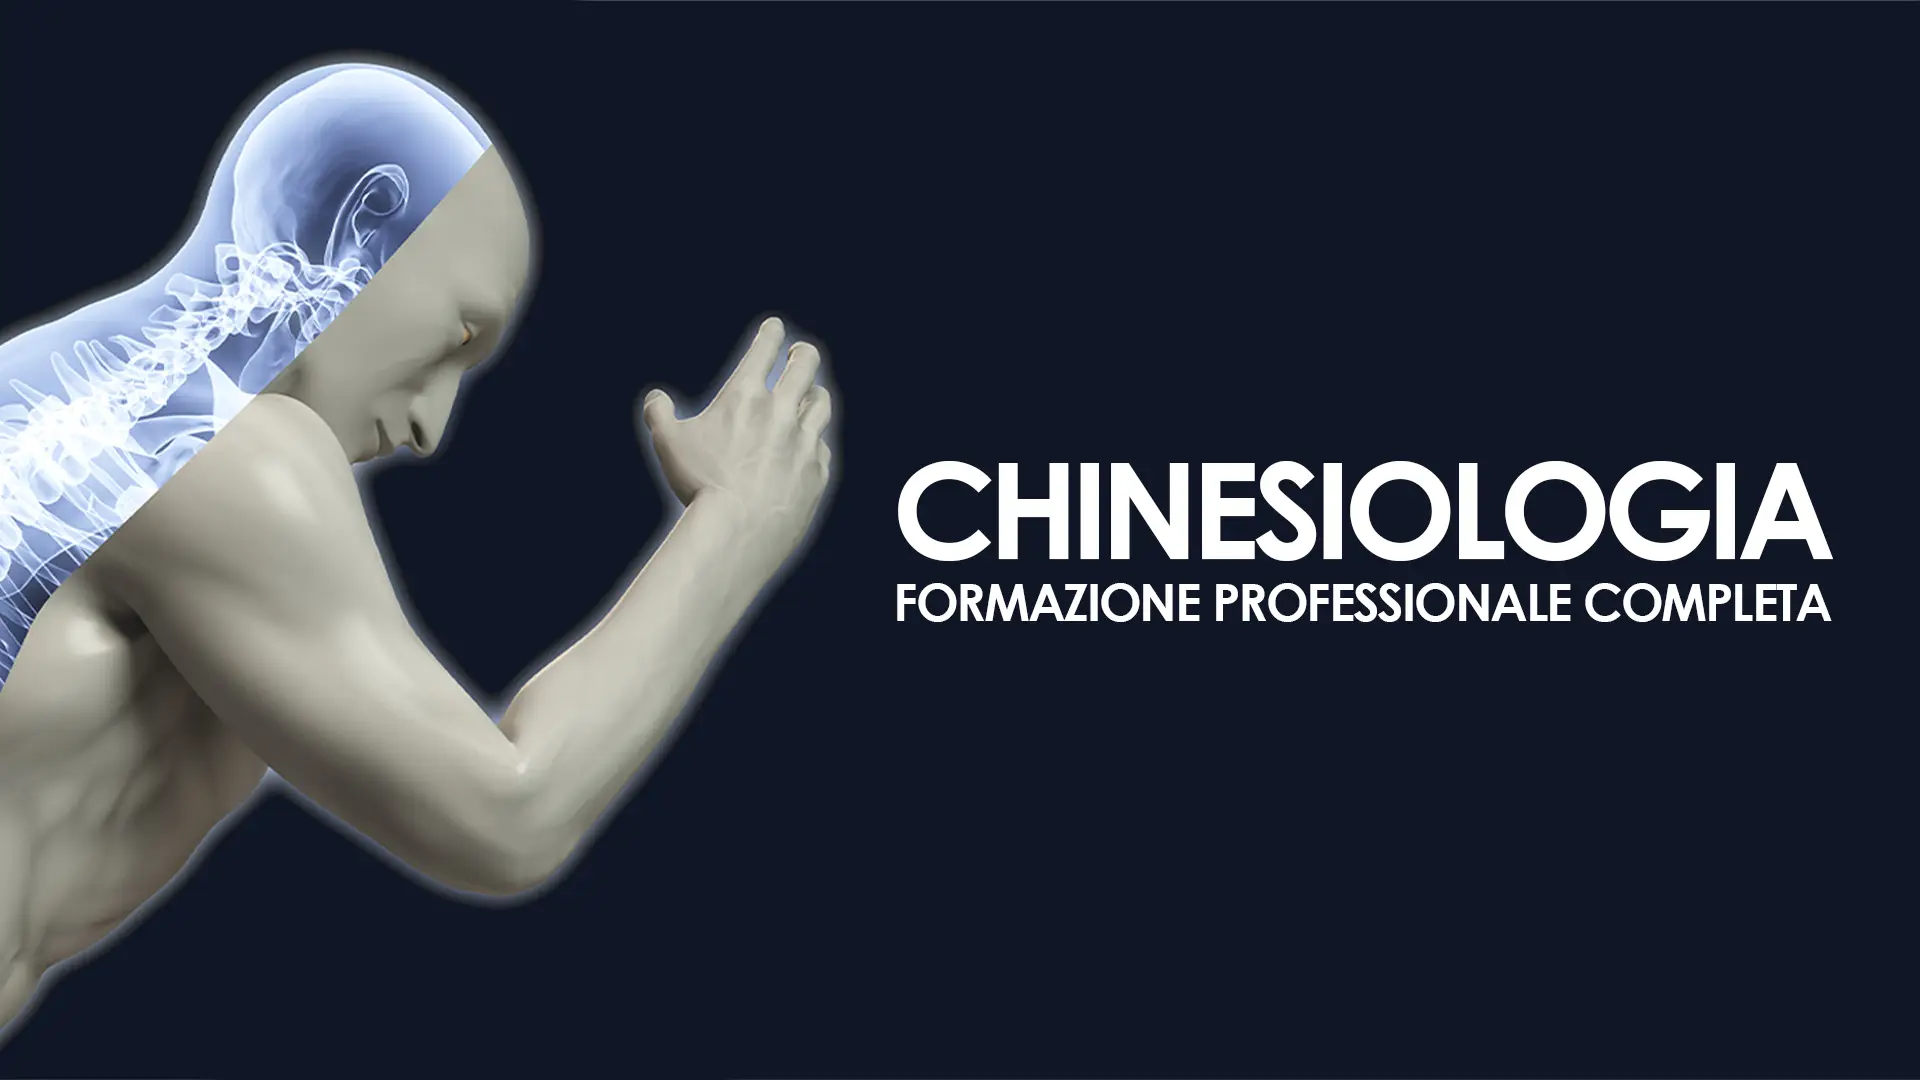 https://www.sportscience.com/wp-content/uploads/sites/39/2022/07/Master-Chinesiologia.webp